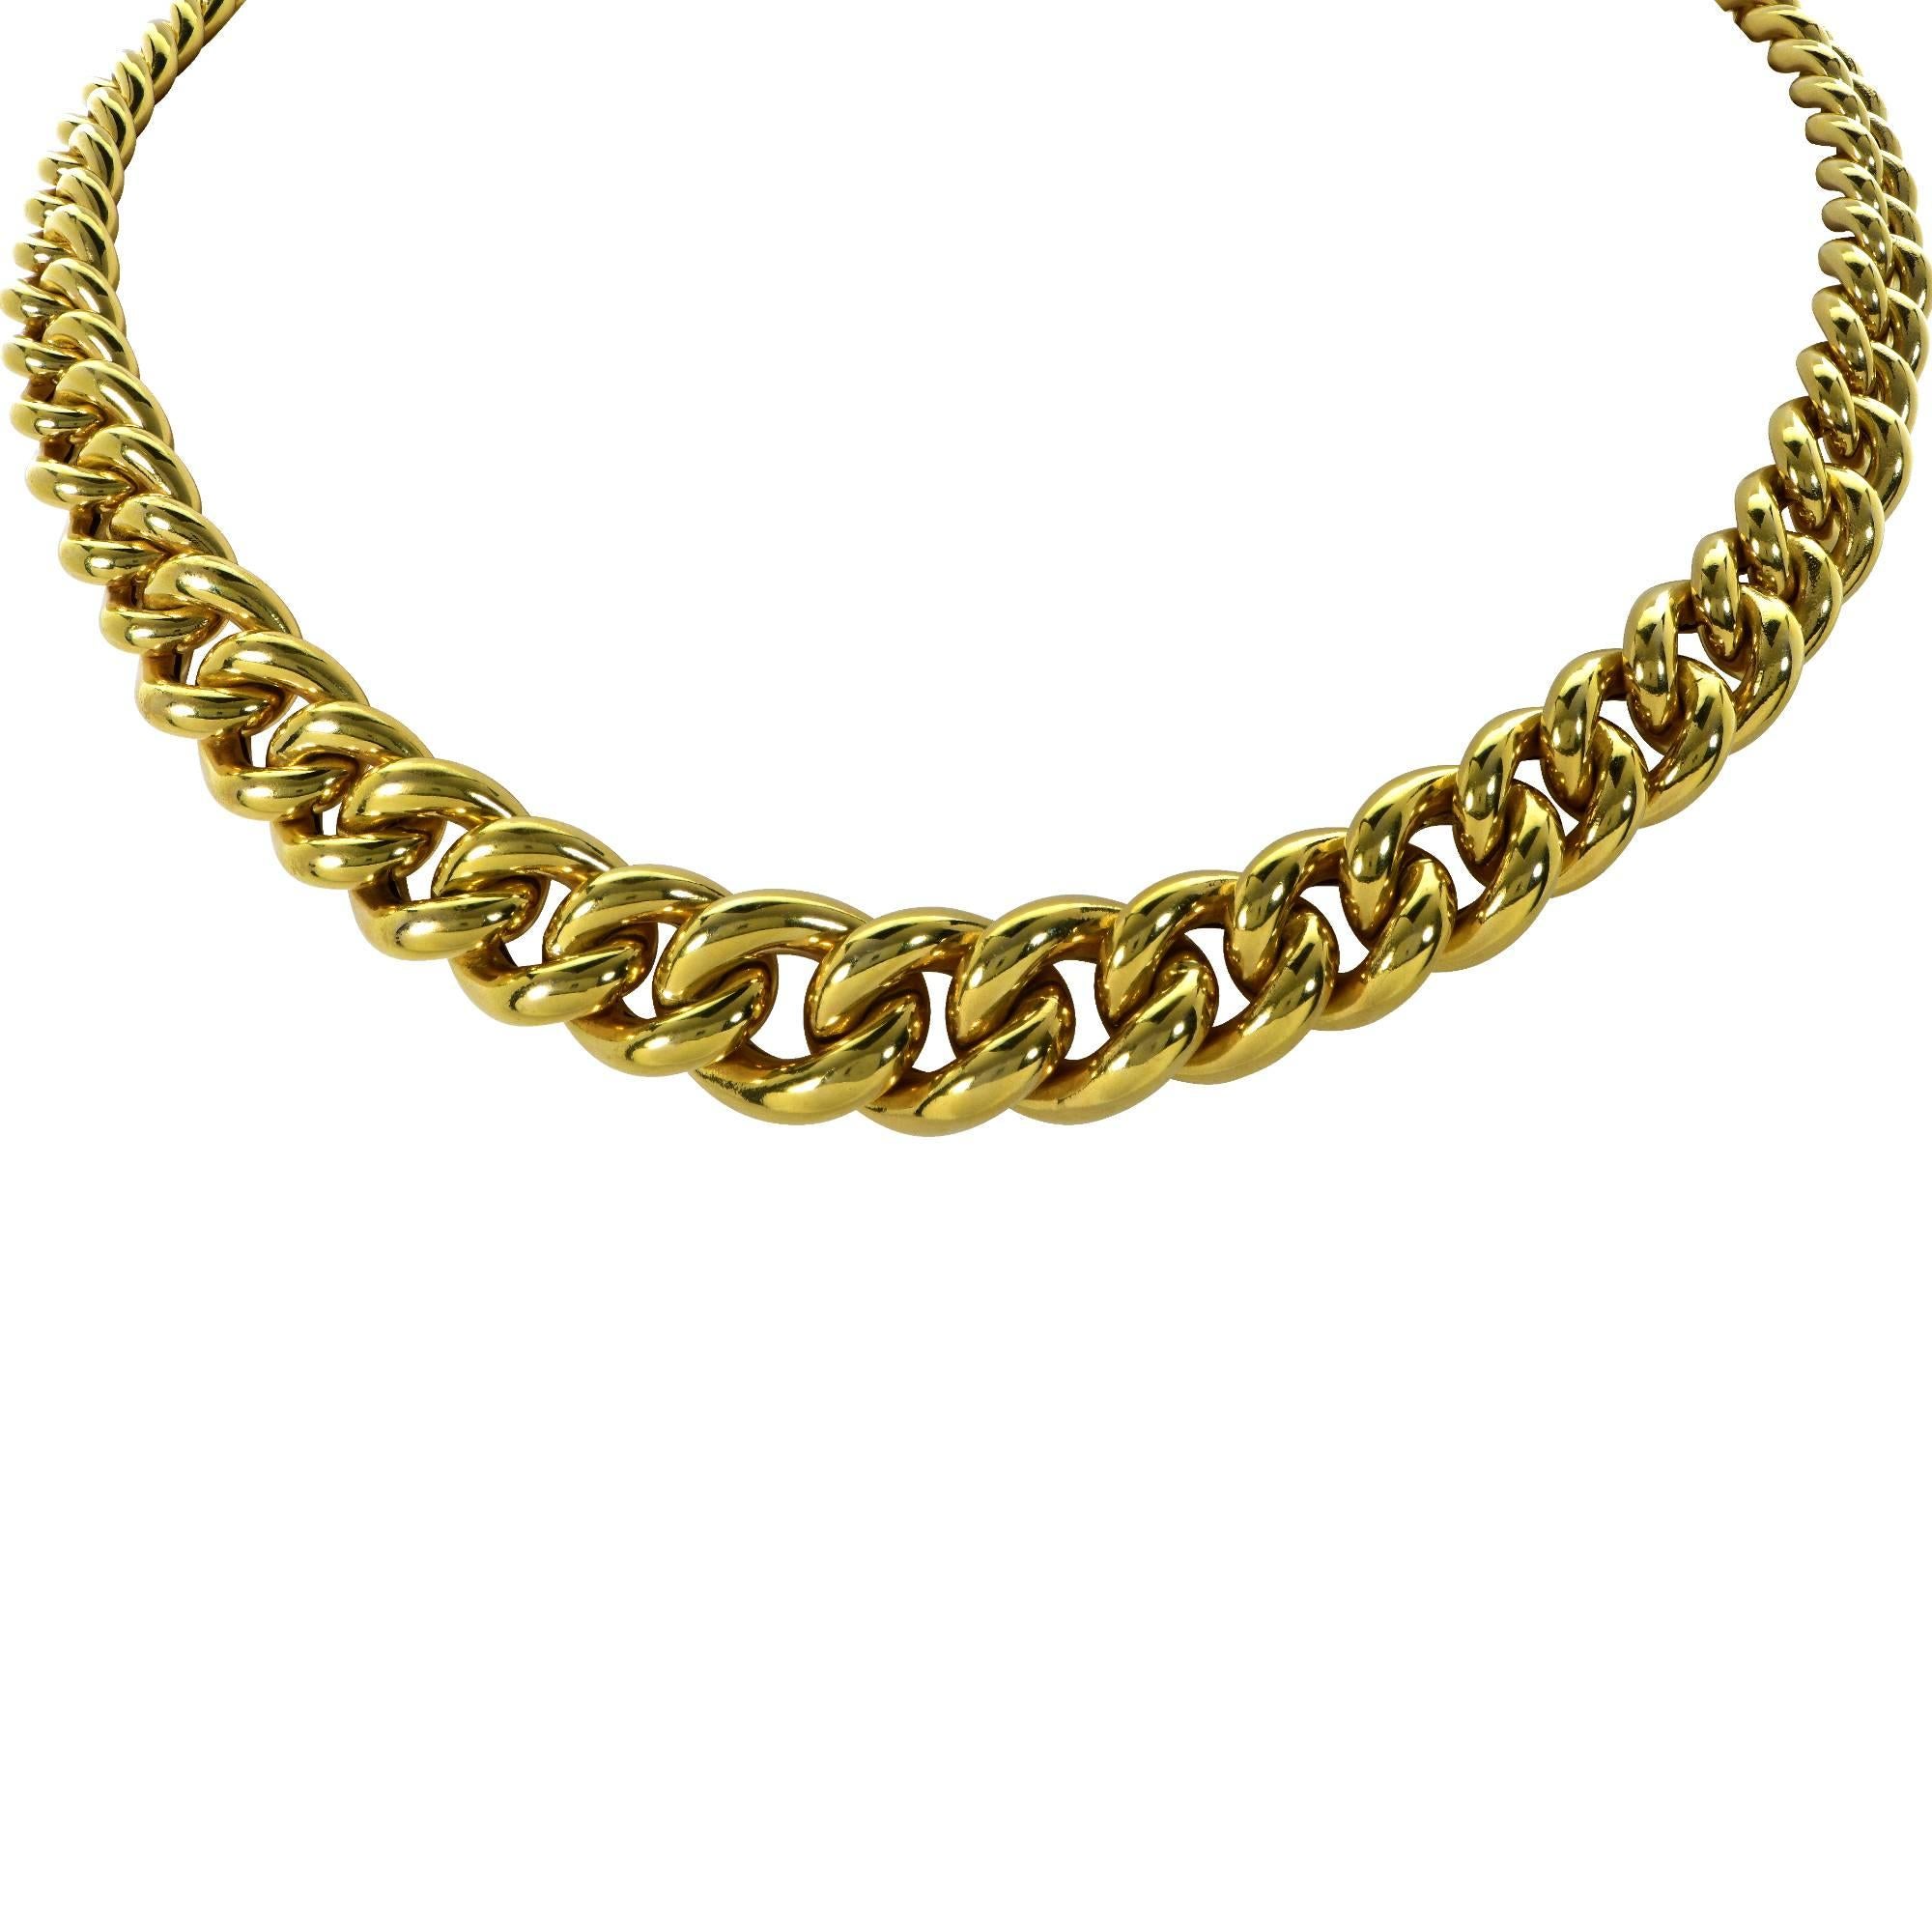 Italian 14k yellow gold necklace featuring high polish rounded curb links.

The curb links taper from .33 inches to .60 inch in width and measures 17 inches in length.
It is stamped and/or tested as 14k gold.
The metal weight is 36.15 grams.
Our